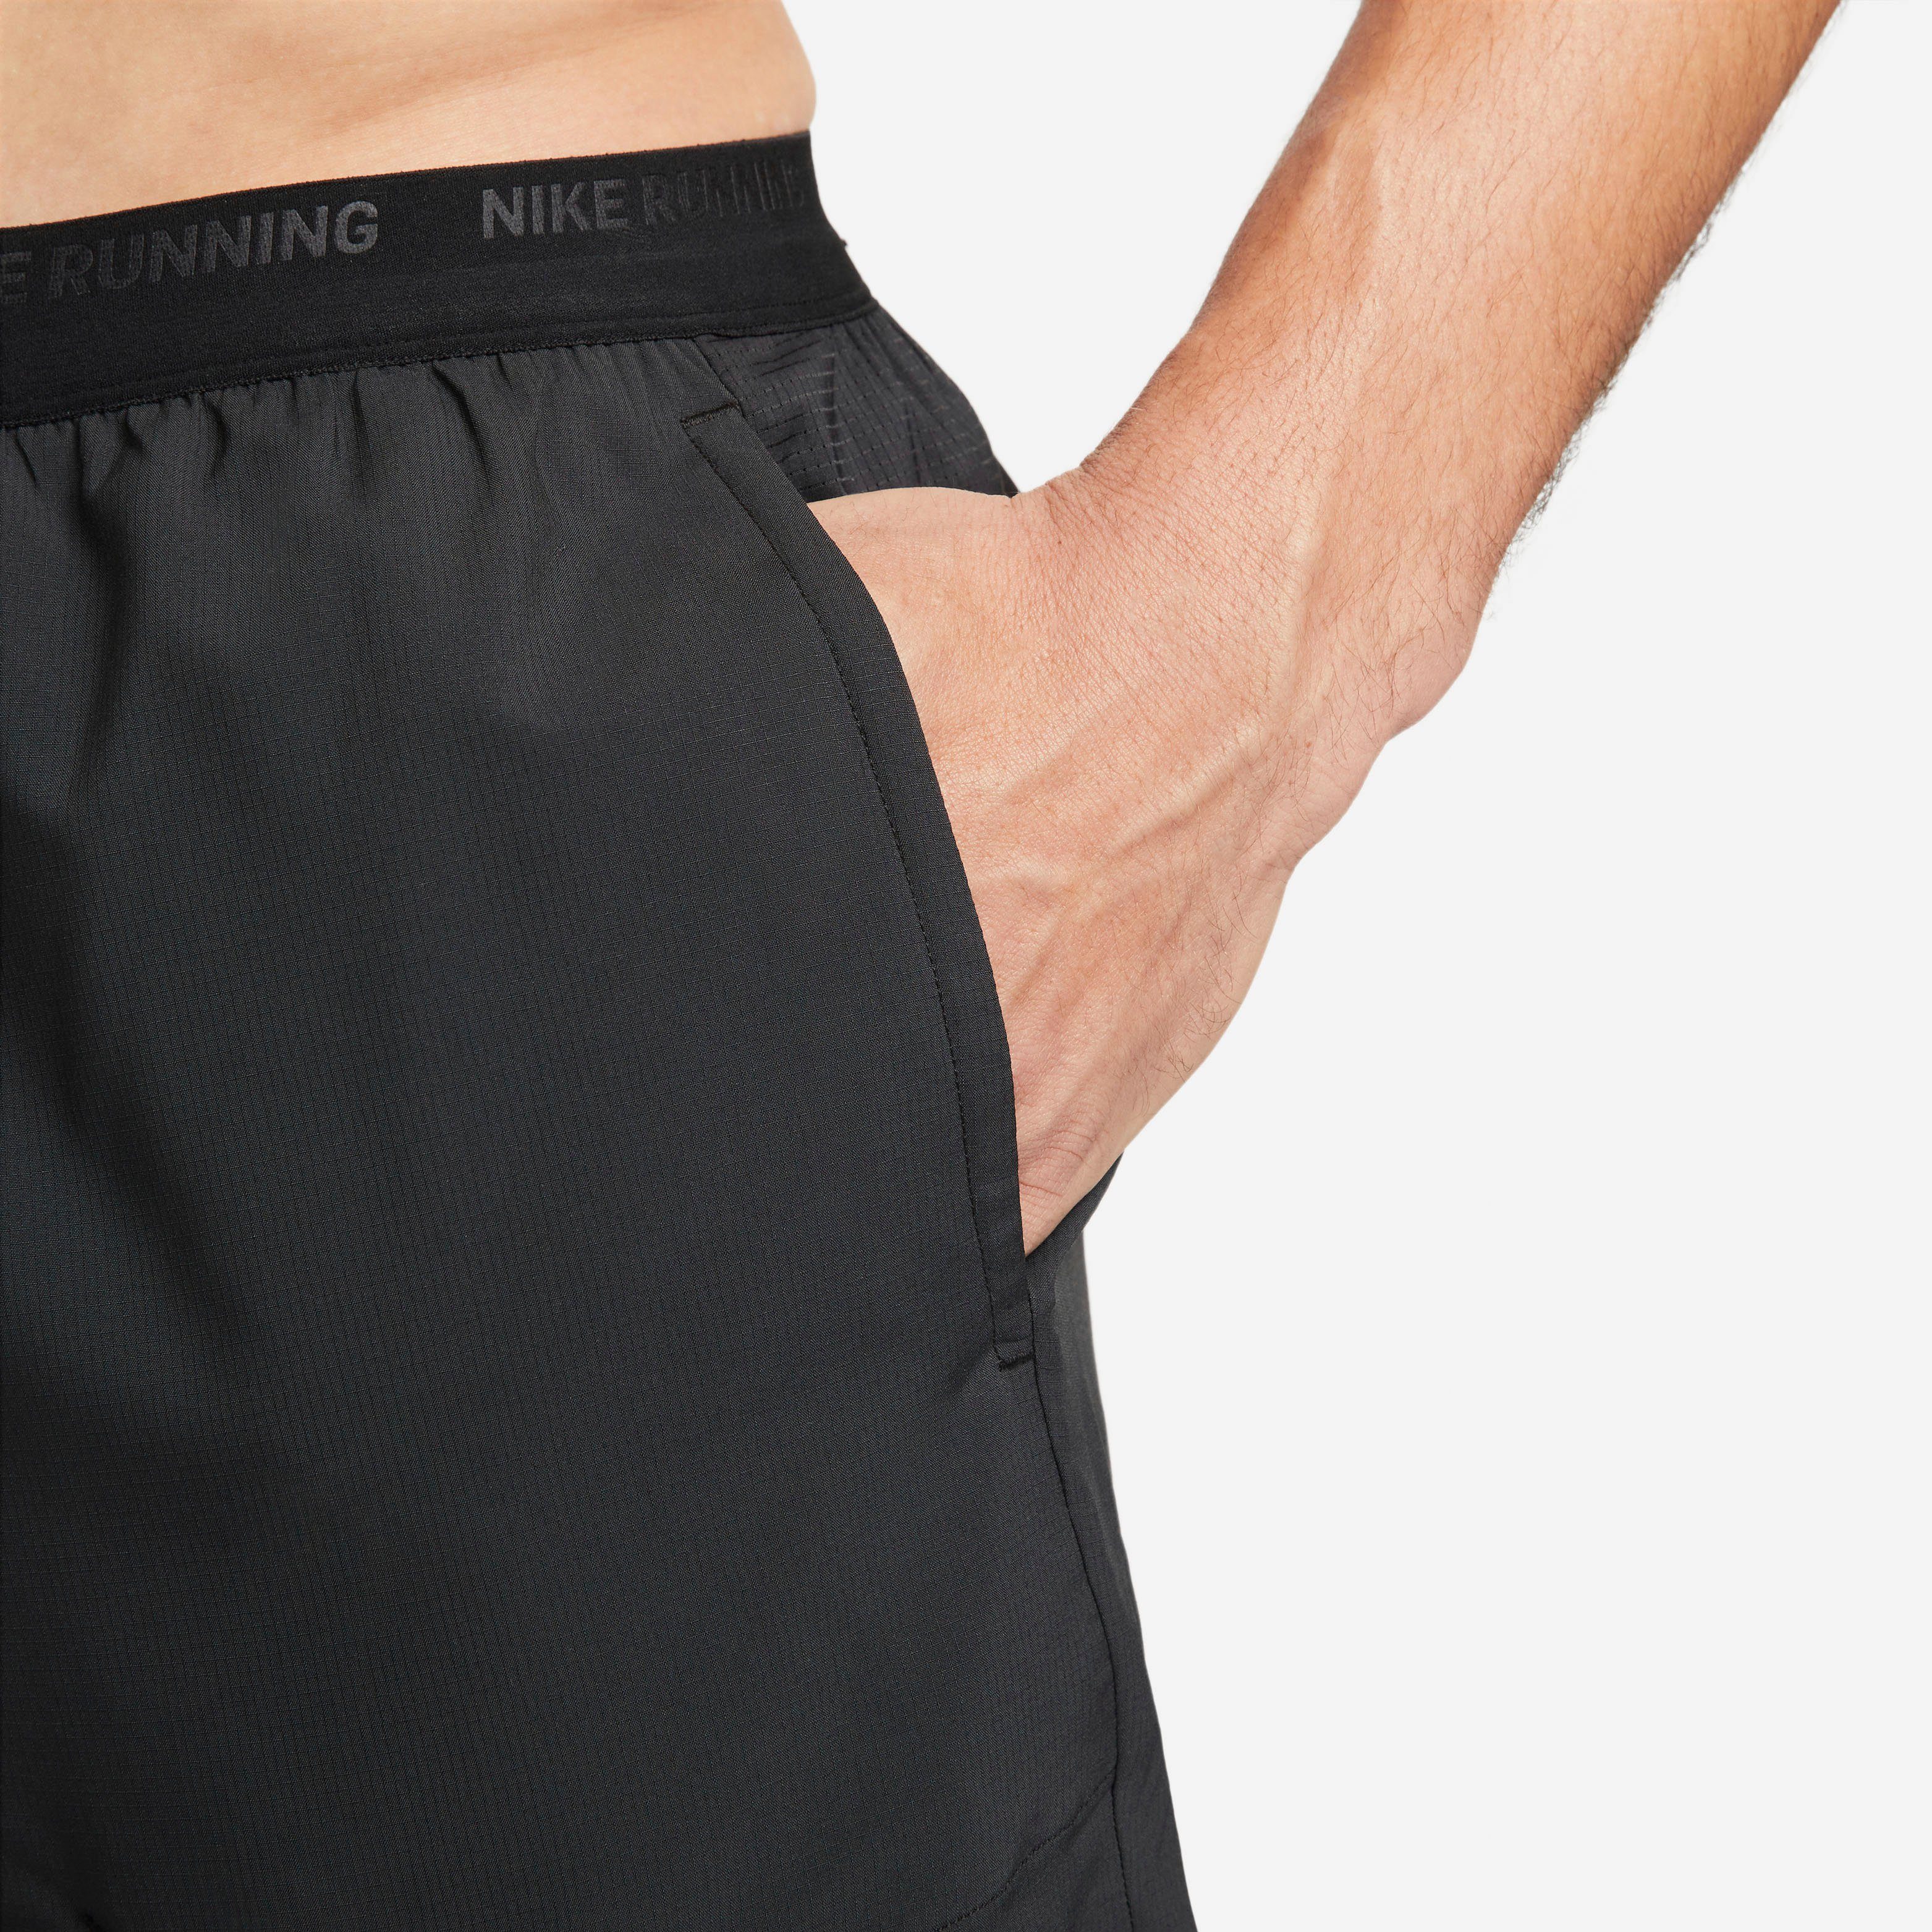 Brief-Lined Nike " Shorts Dri-FIT Men's Laufshorts Stride Running